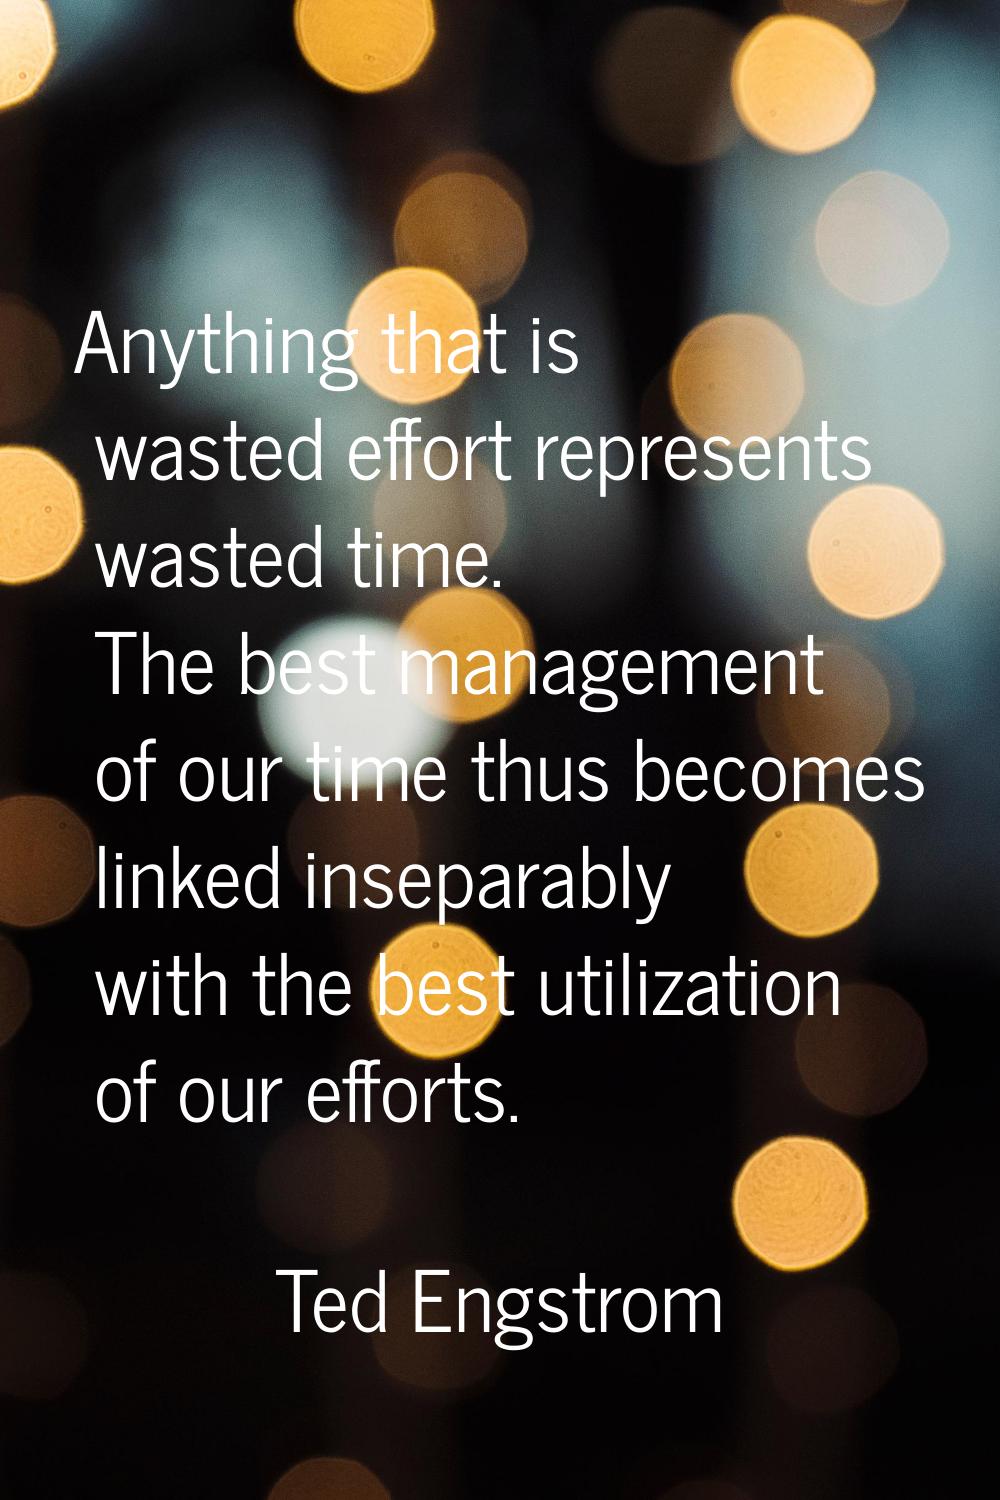 Anything that is wasted effort represents wasted time. The best management of our time thus becomes